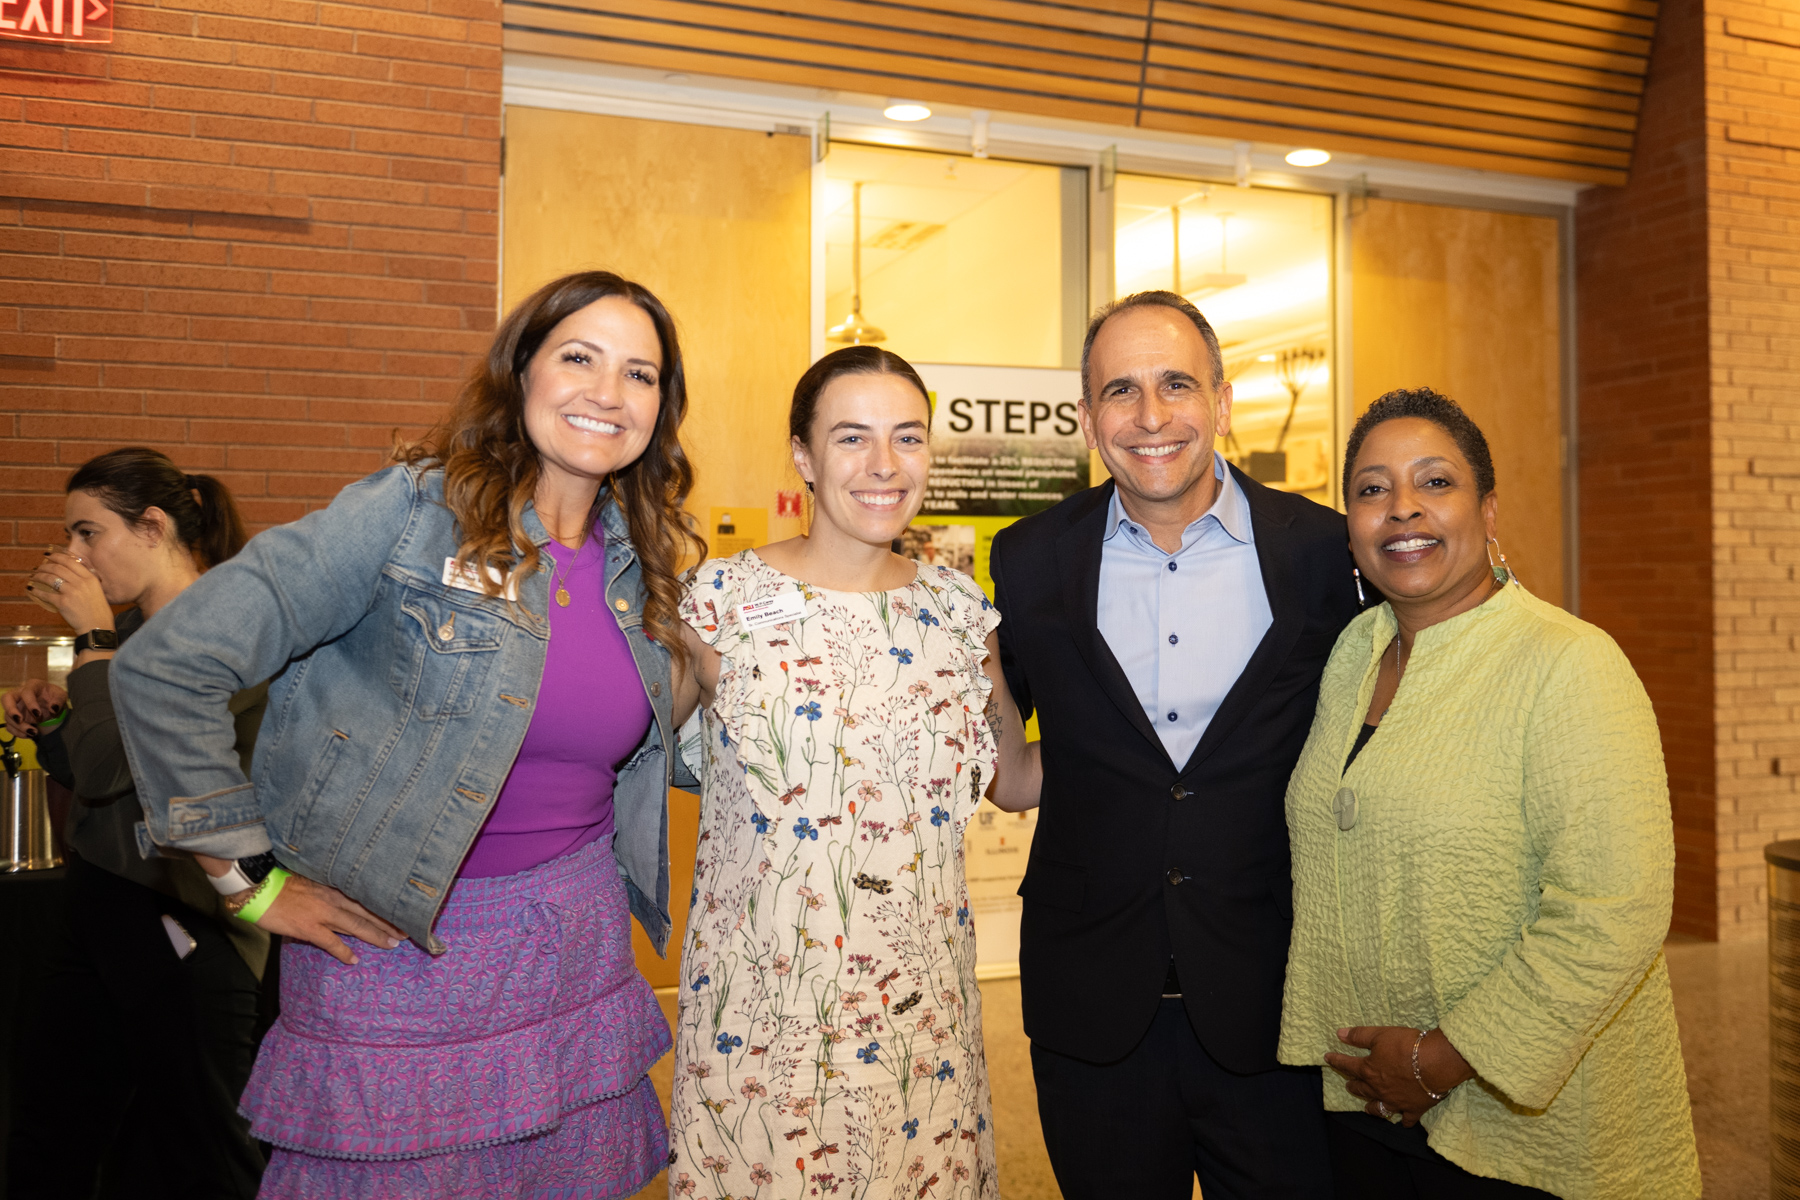 From left: Jennifer Mareiro, Director of Human Resources; Emily Beach, Director of Communications; Dan Gruber, Associate Dean for Teaching & Learning; Lois Brown, Director of the CSRD. Photo by Ivan Martinez Photography.